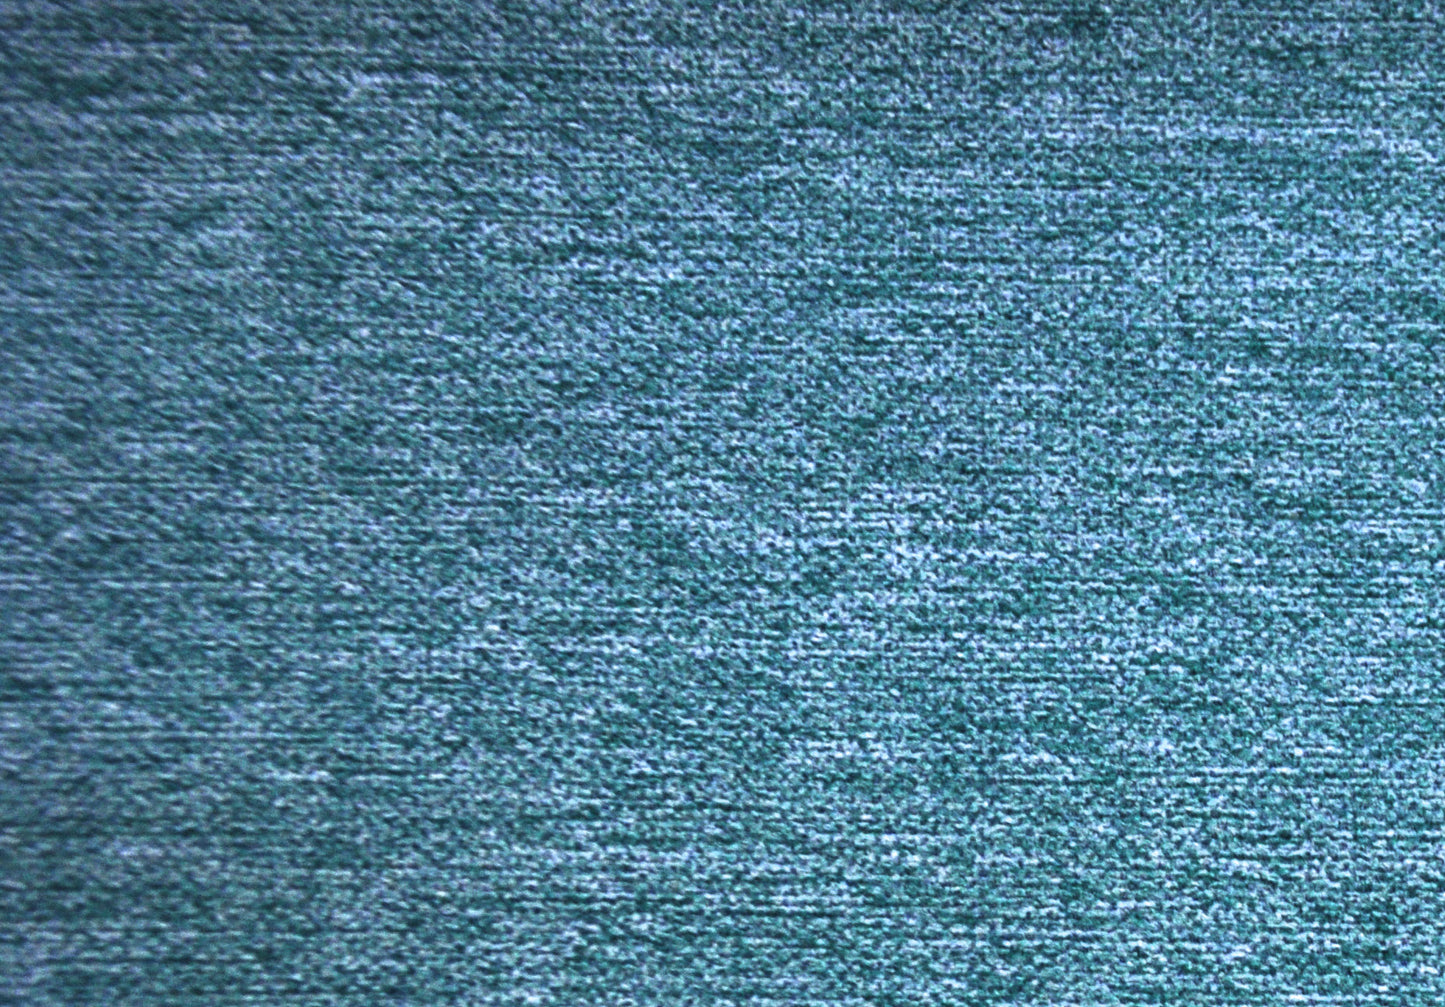 "Juno" Fabric (Teal color)